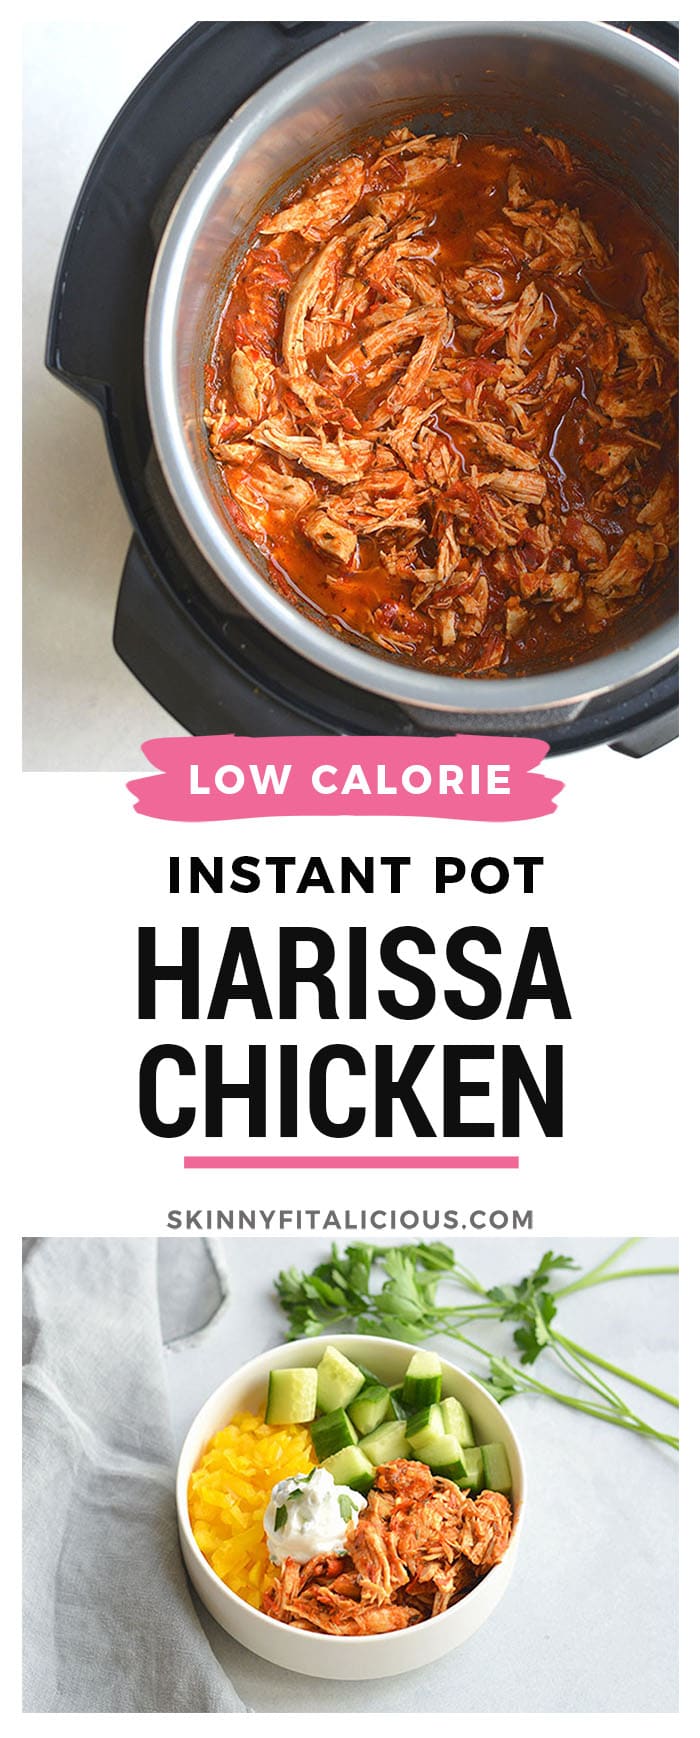 Instant Pot Harissa Shredded Chicken Bowls! This simple, healthy shredded chicken is cooked in under 30 minutes in an Instant Pot with Harissa for a spicy kick! Paired with sliced cucumber, bell pepper and Greek yogurt for a complete meal! Low Calorie + Gluten Free